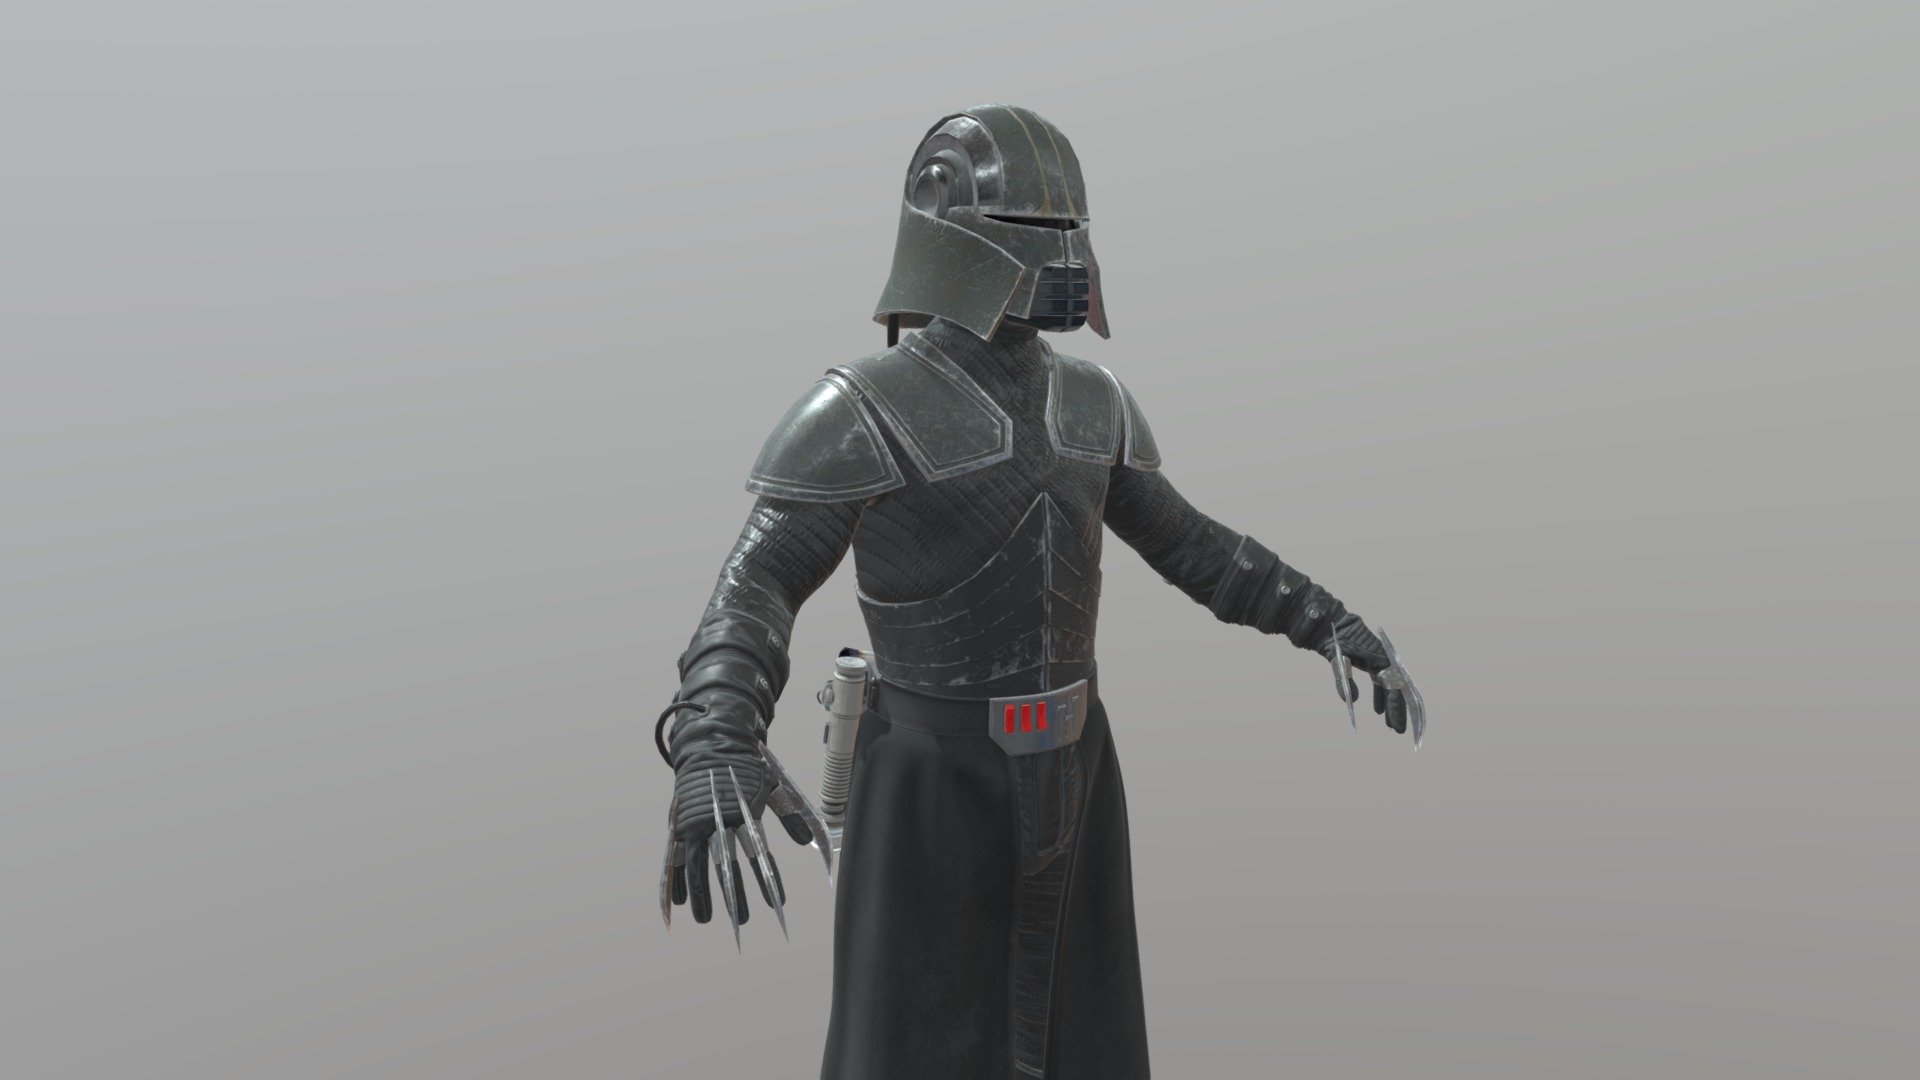 Starkiller-Sith Stalker remake (Hoth) - 3D model by This_Guy446 (@pai0003) 3d model